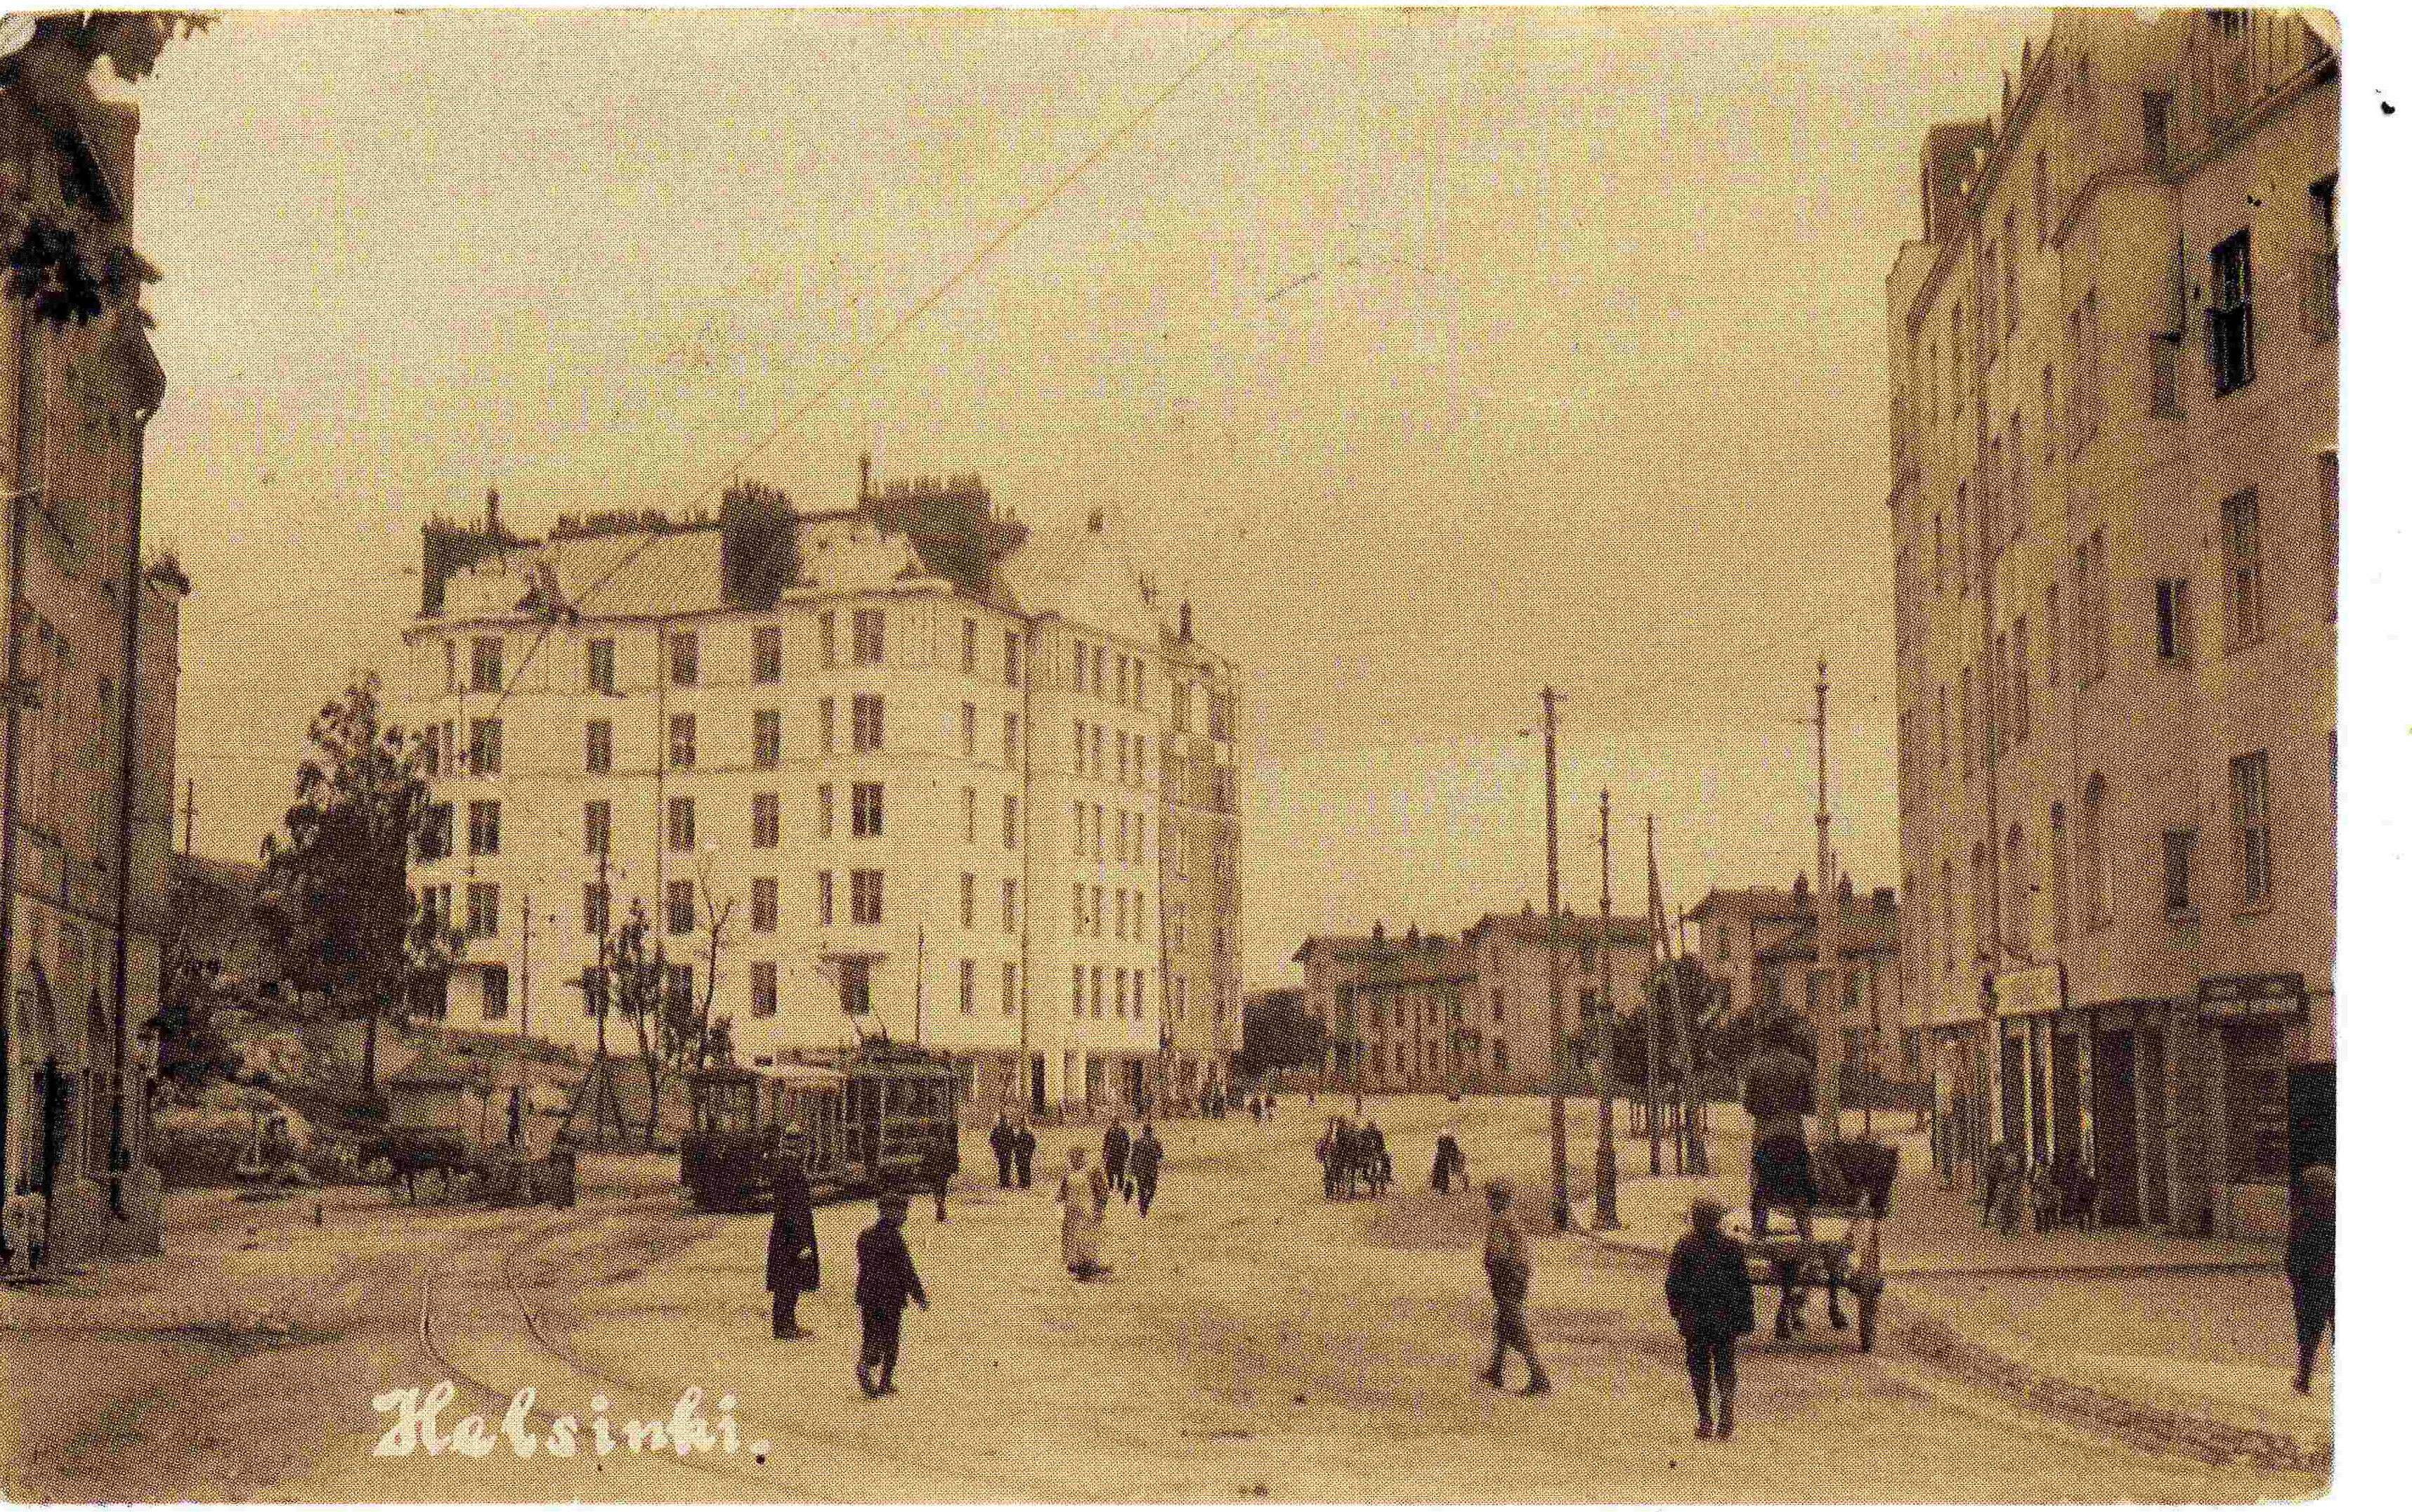 The seedling curve in 1918. Helsinki. (mail card)